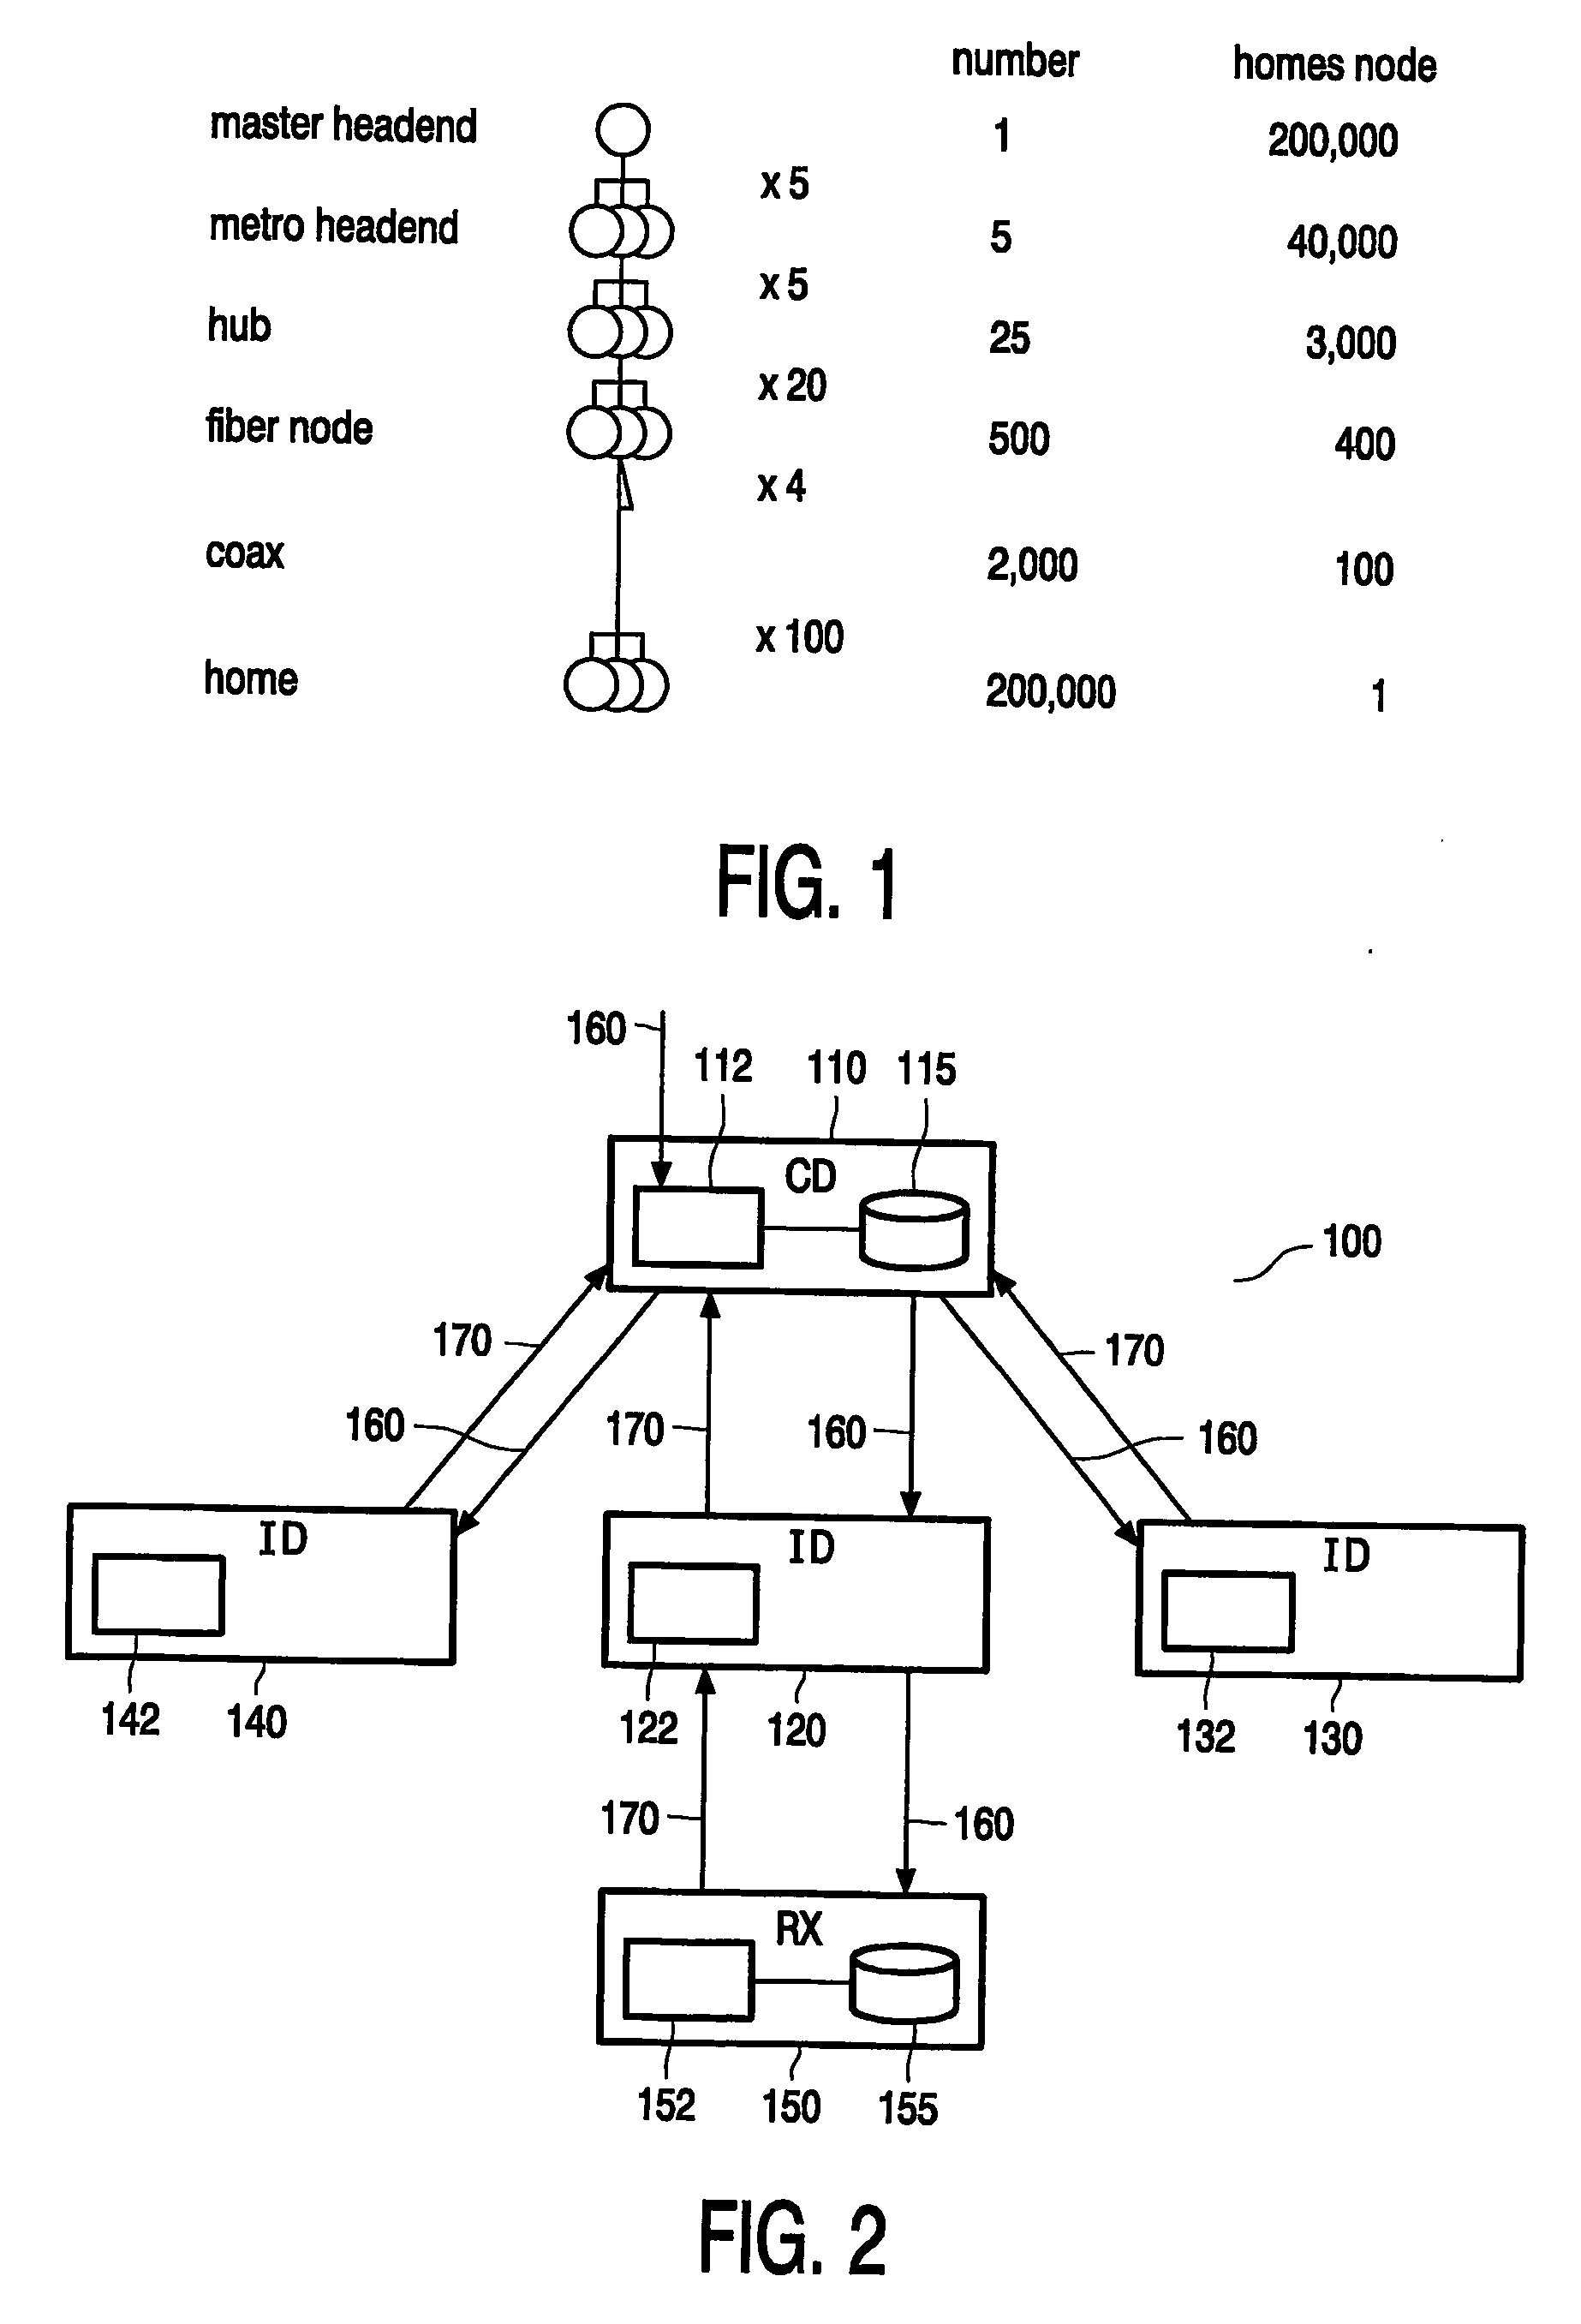 Channel tapping in a near-video-on-demand system